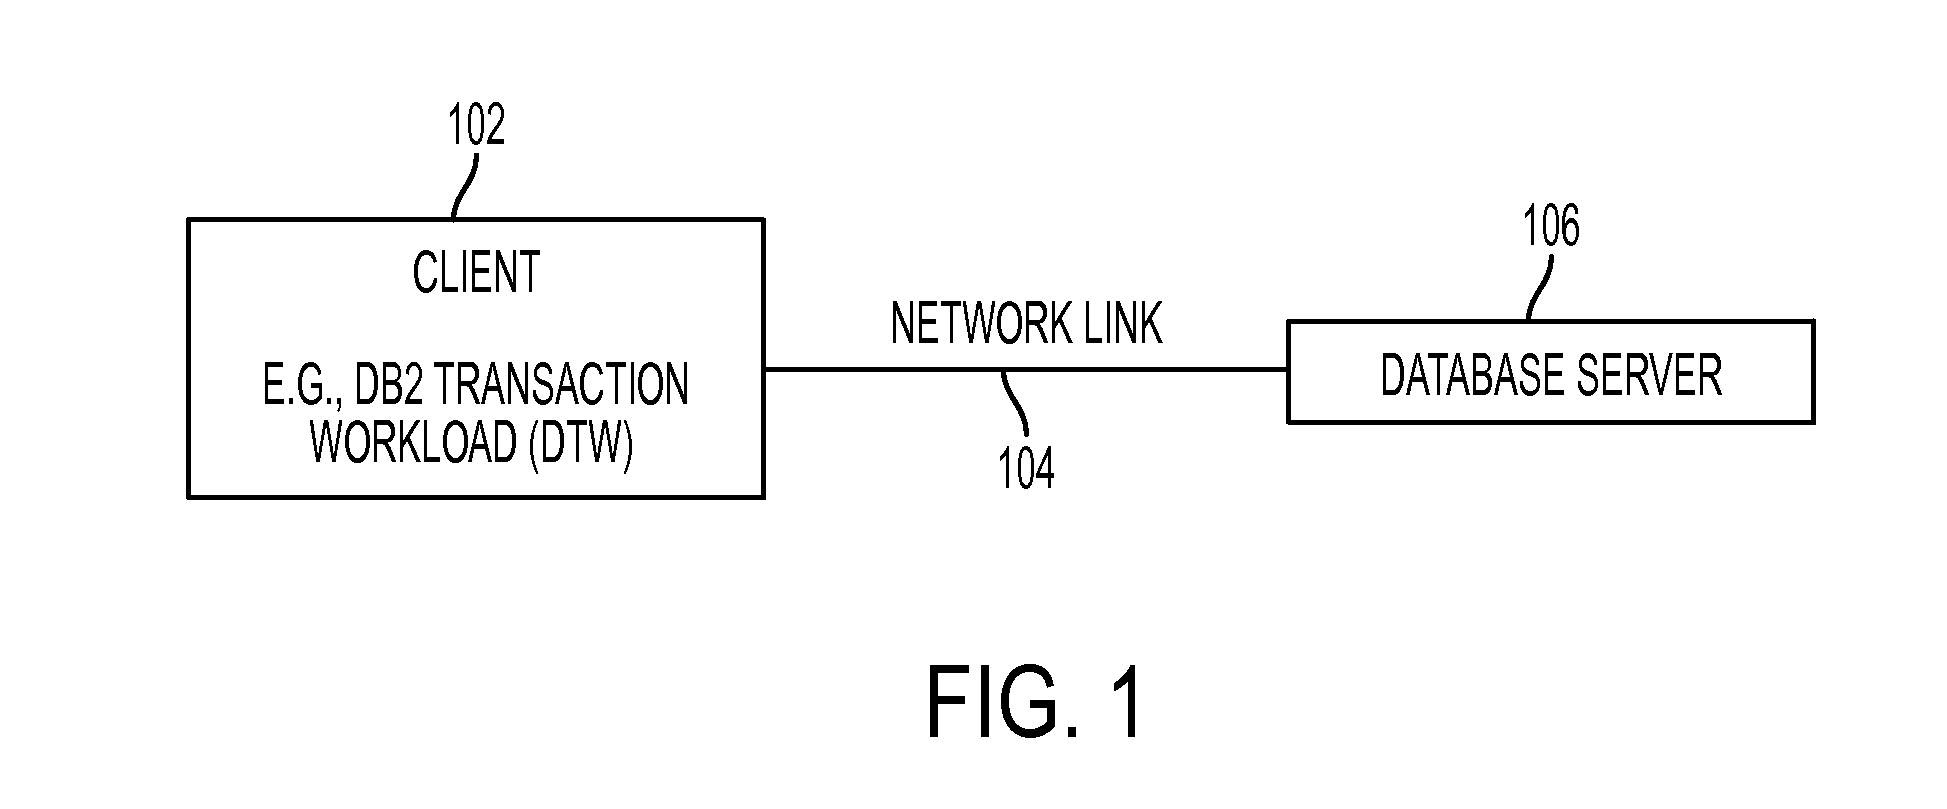 Method to apply perturbation for resource bottleneck detection and capacity planning